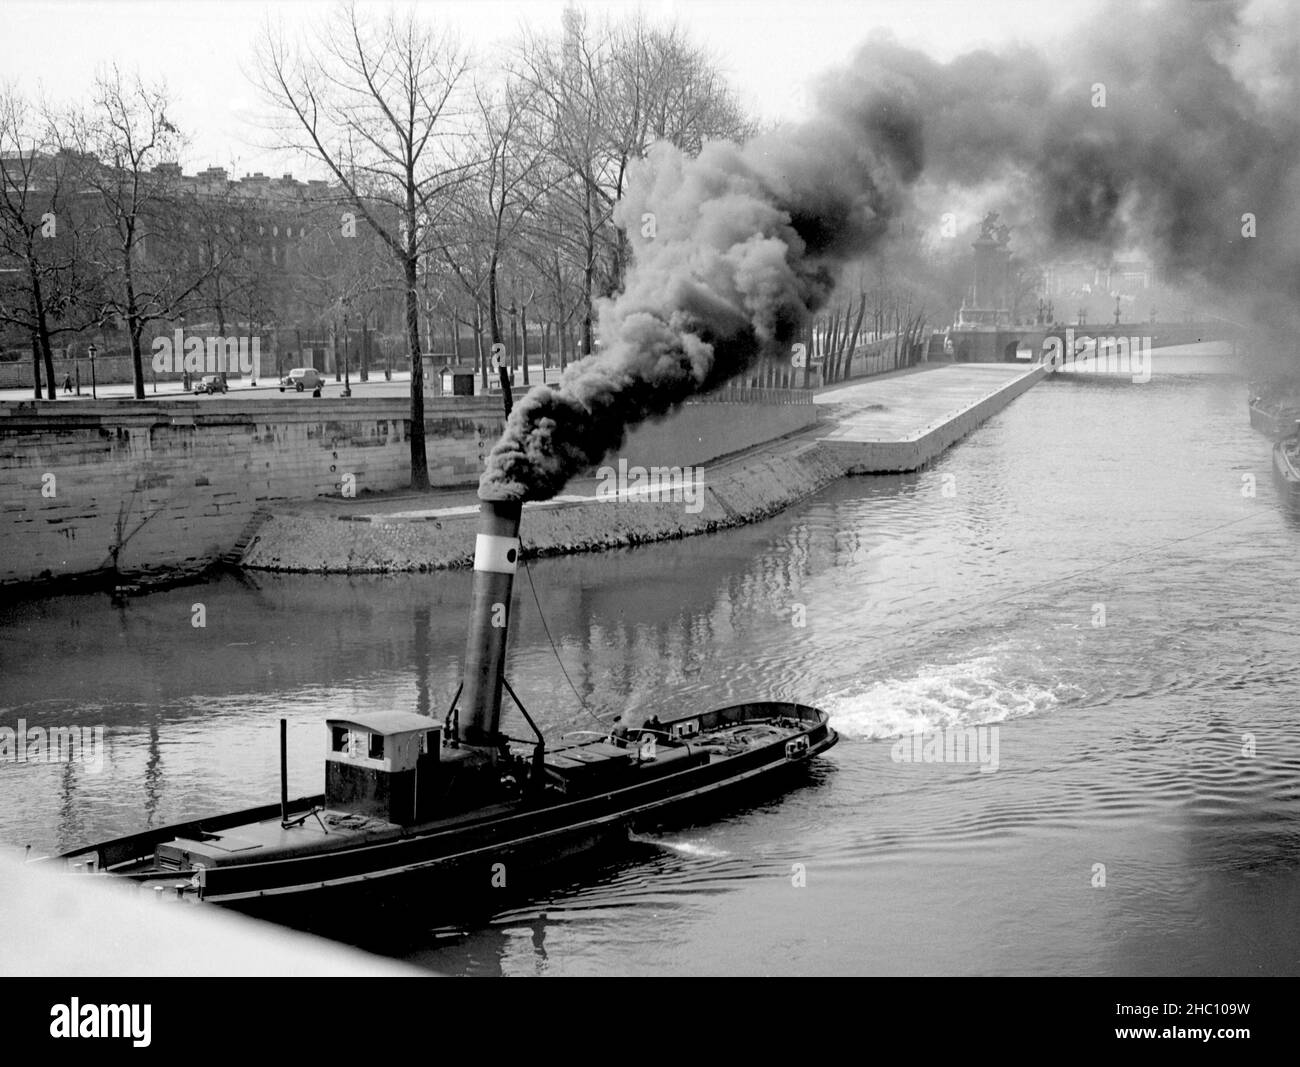 Paris Seine river smoky tow-barge at Pont de la Concorde, 1945. Smoke billows from a tow that is pulling out-of-view freight barges. Pont Alexandre III and the Eiffel Tower are glimpsed in the background. Stock Photo